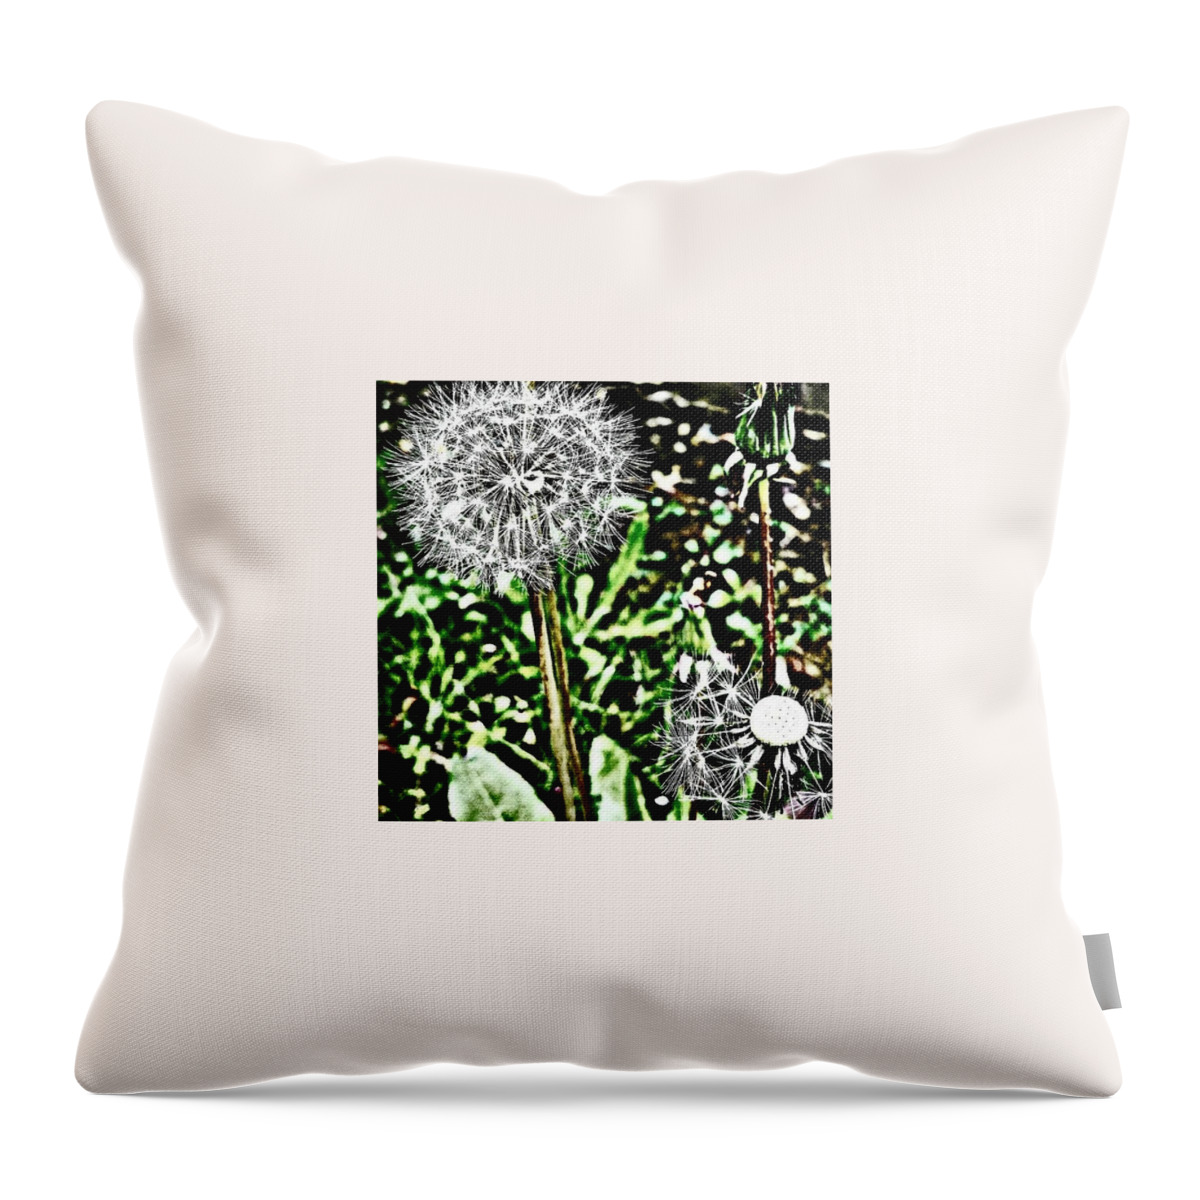 Beautiful Throw Pillow featuring the photograph Dandelions by Jason Roust